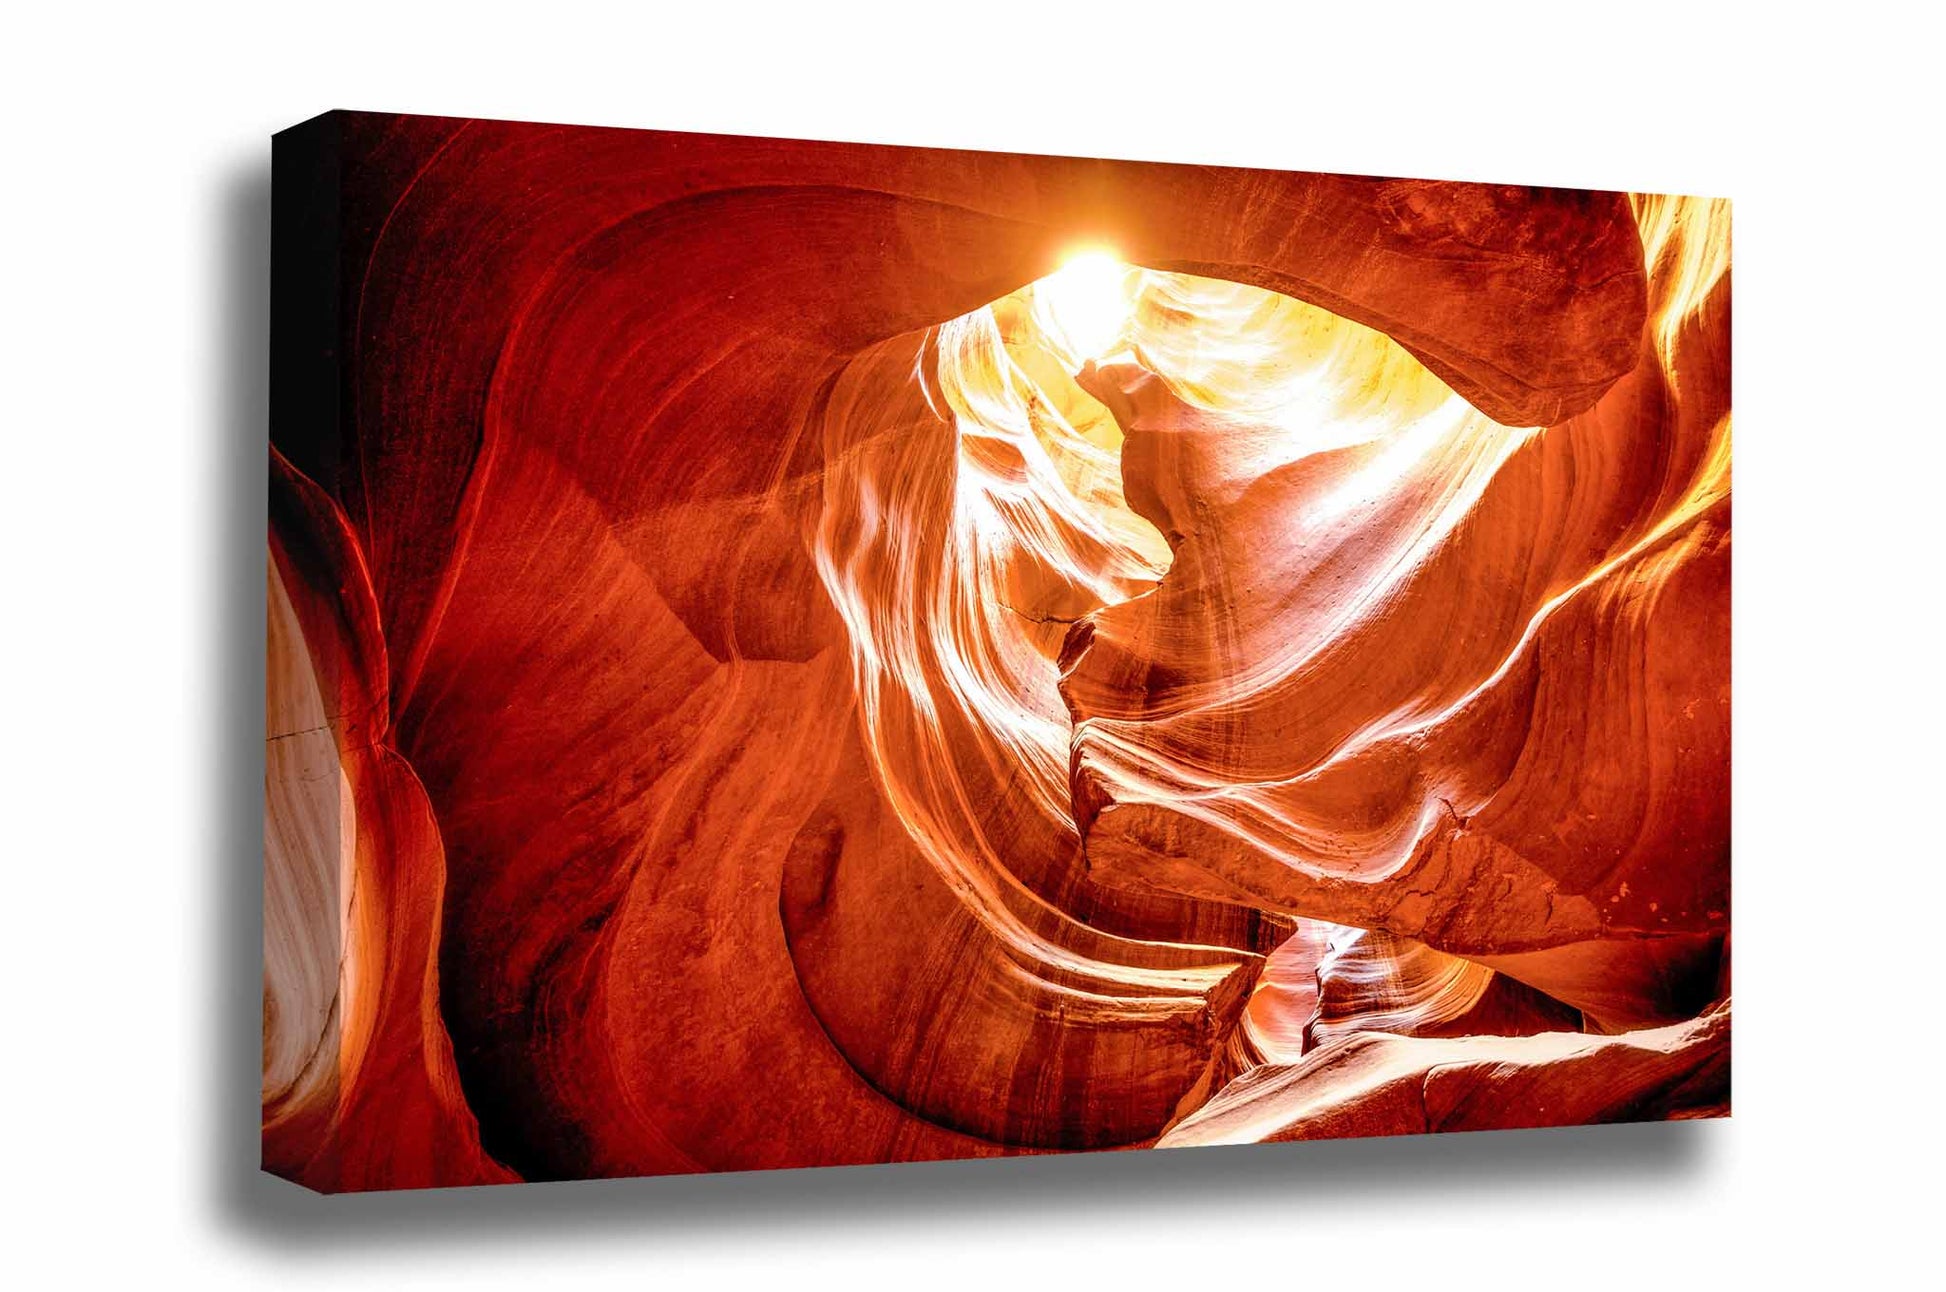 Desert southwest canvas wall art of sunlight peeking through an opening in Antelope Canyon near Page, Arizona by Sean Ramsey of Southern Plains Photography.